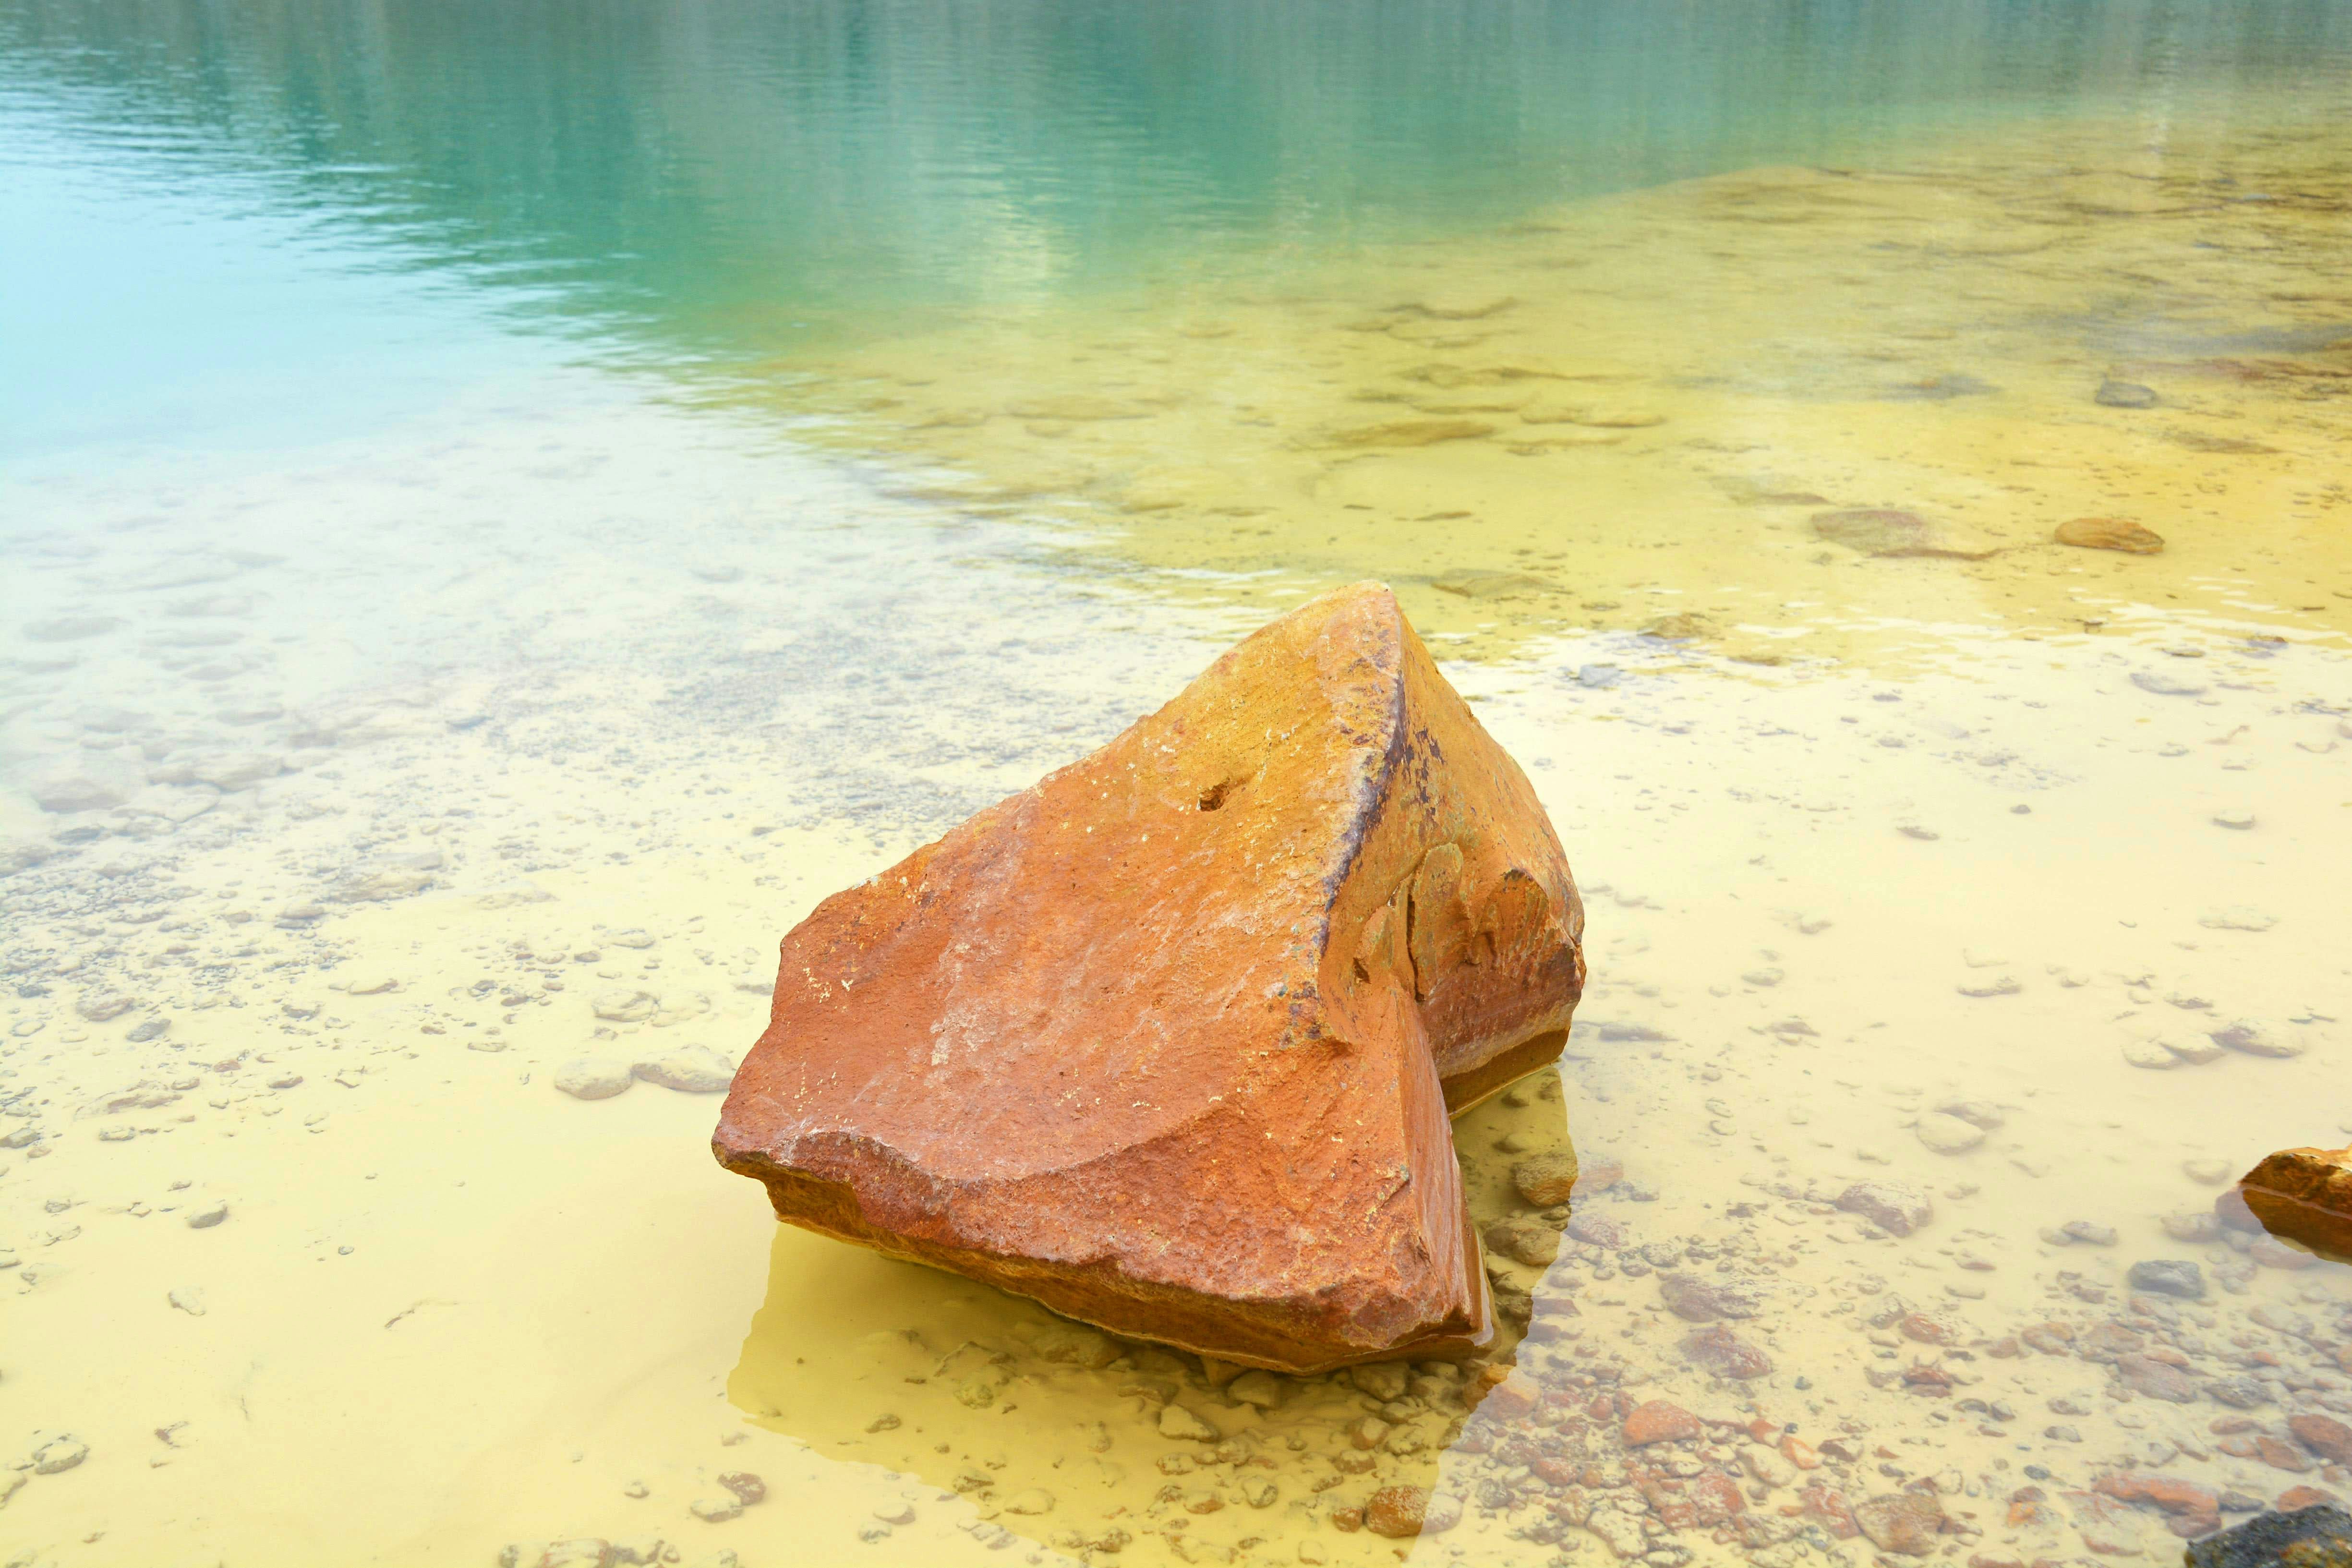 brown rock on white sand near body of water during daytime